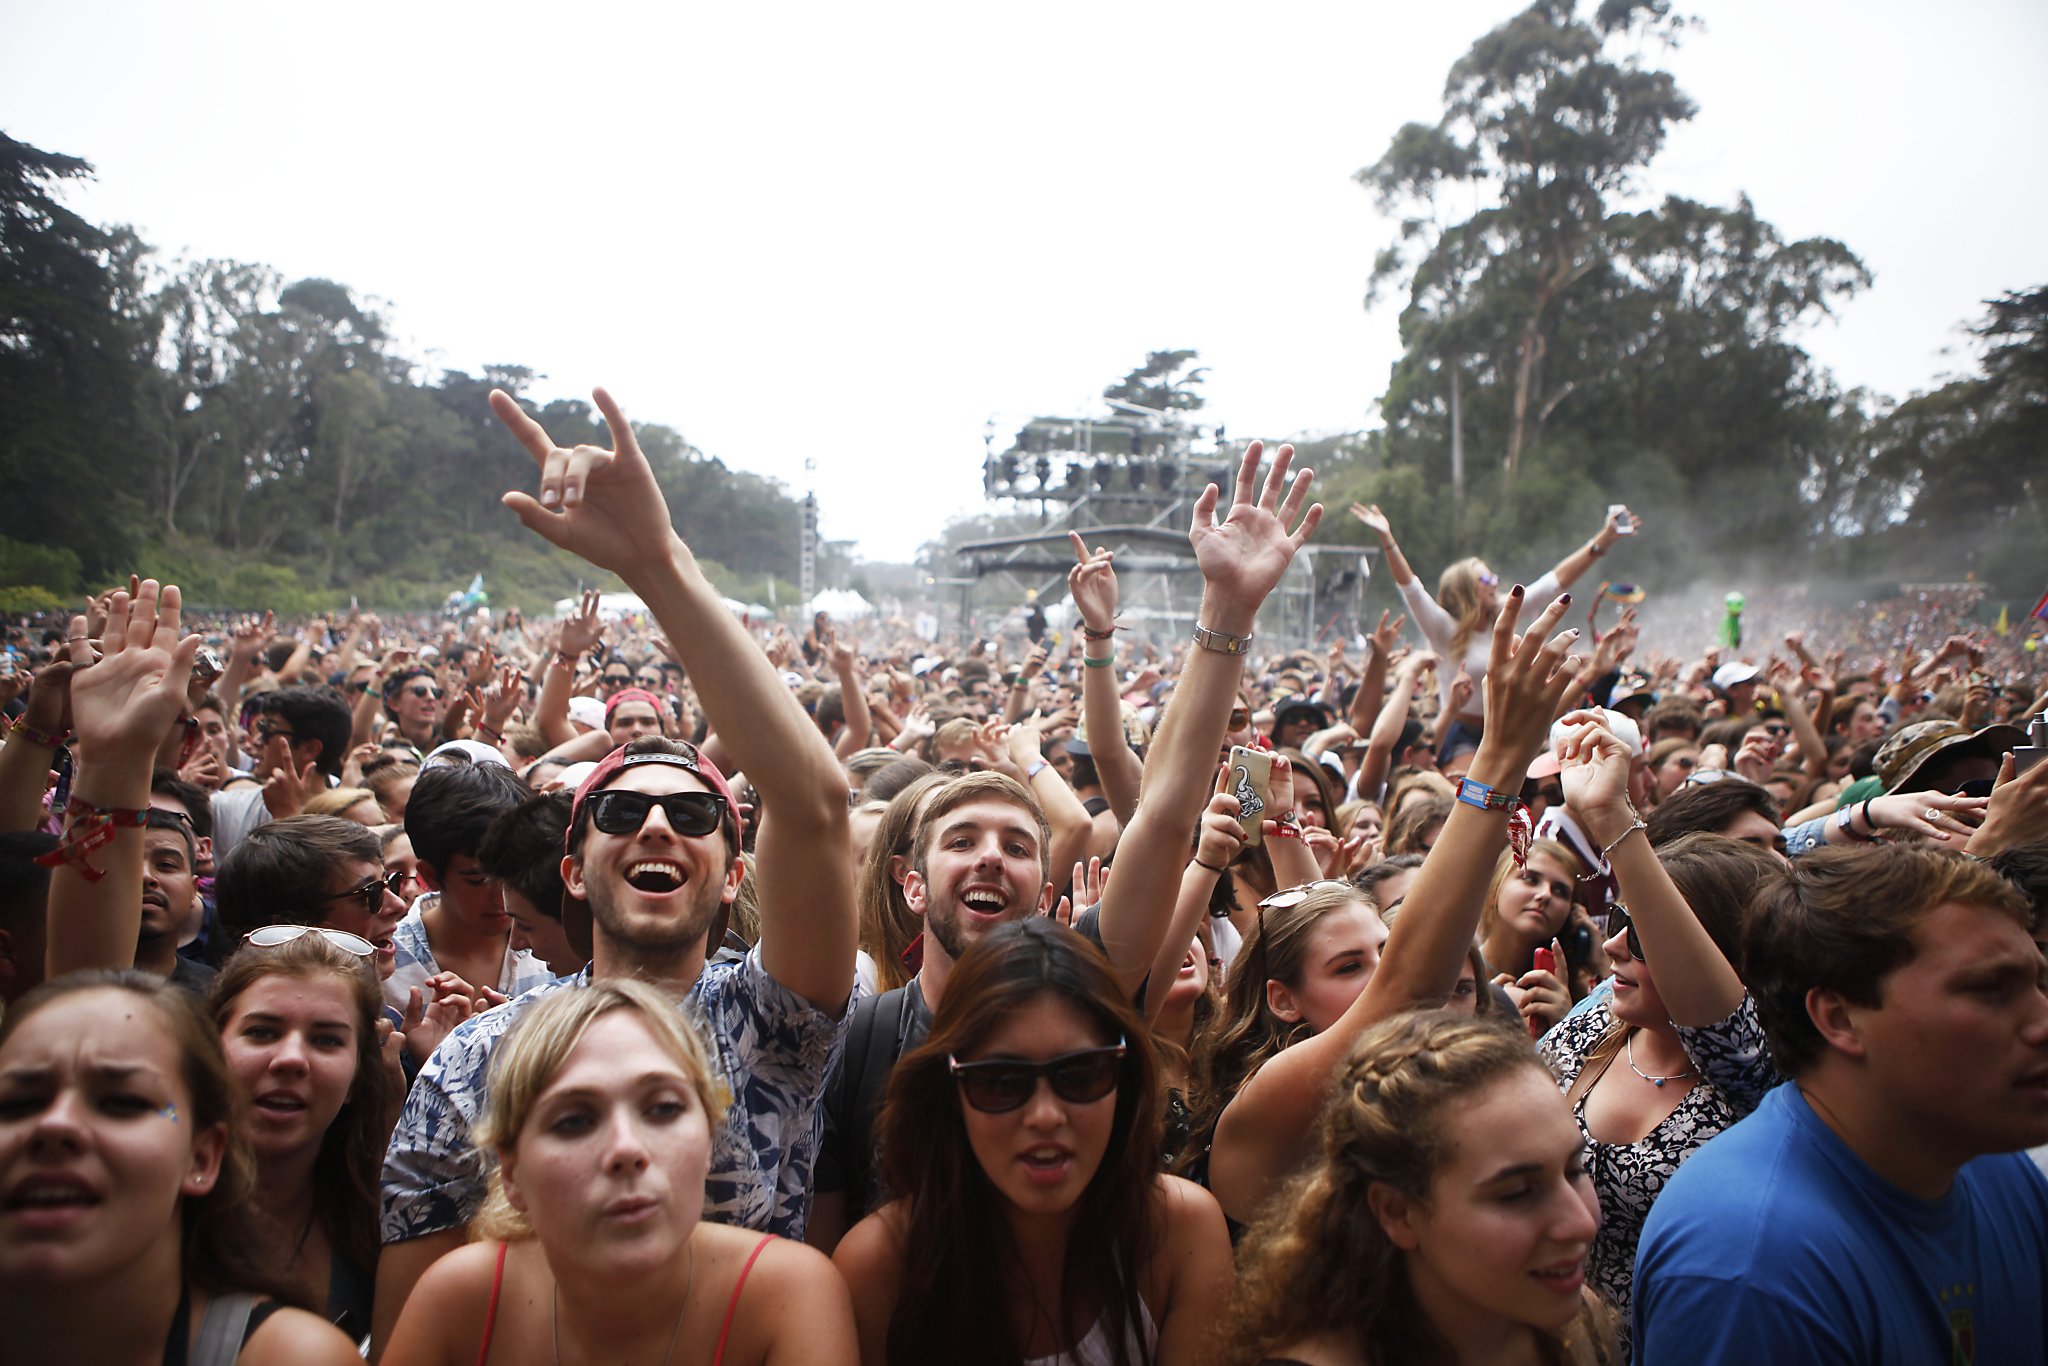 Guide to Bay Area Music Festivals